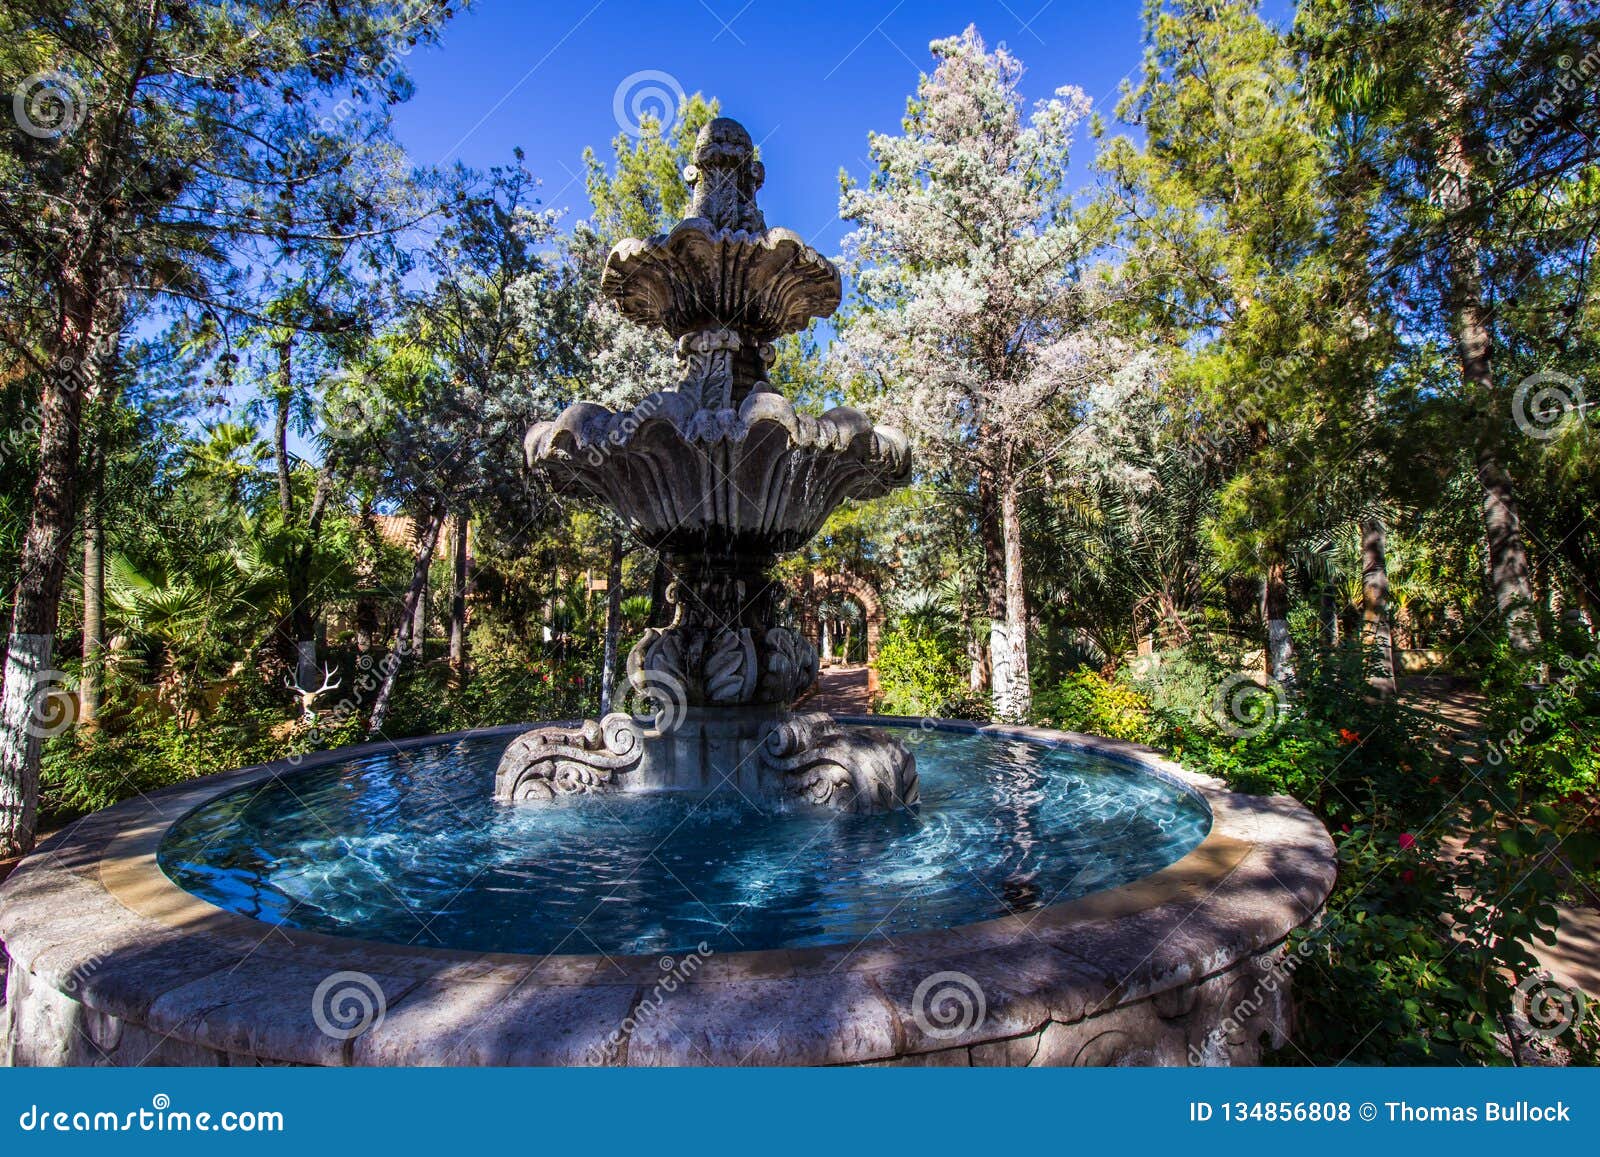 Clear Fountain in Monastery Gardens Stock Photo - Image of round